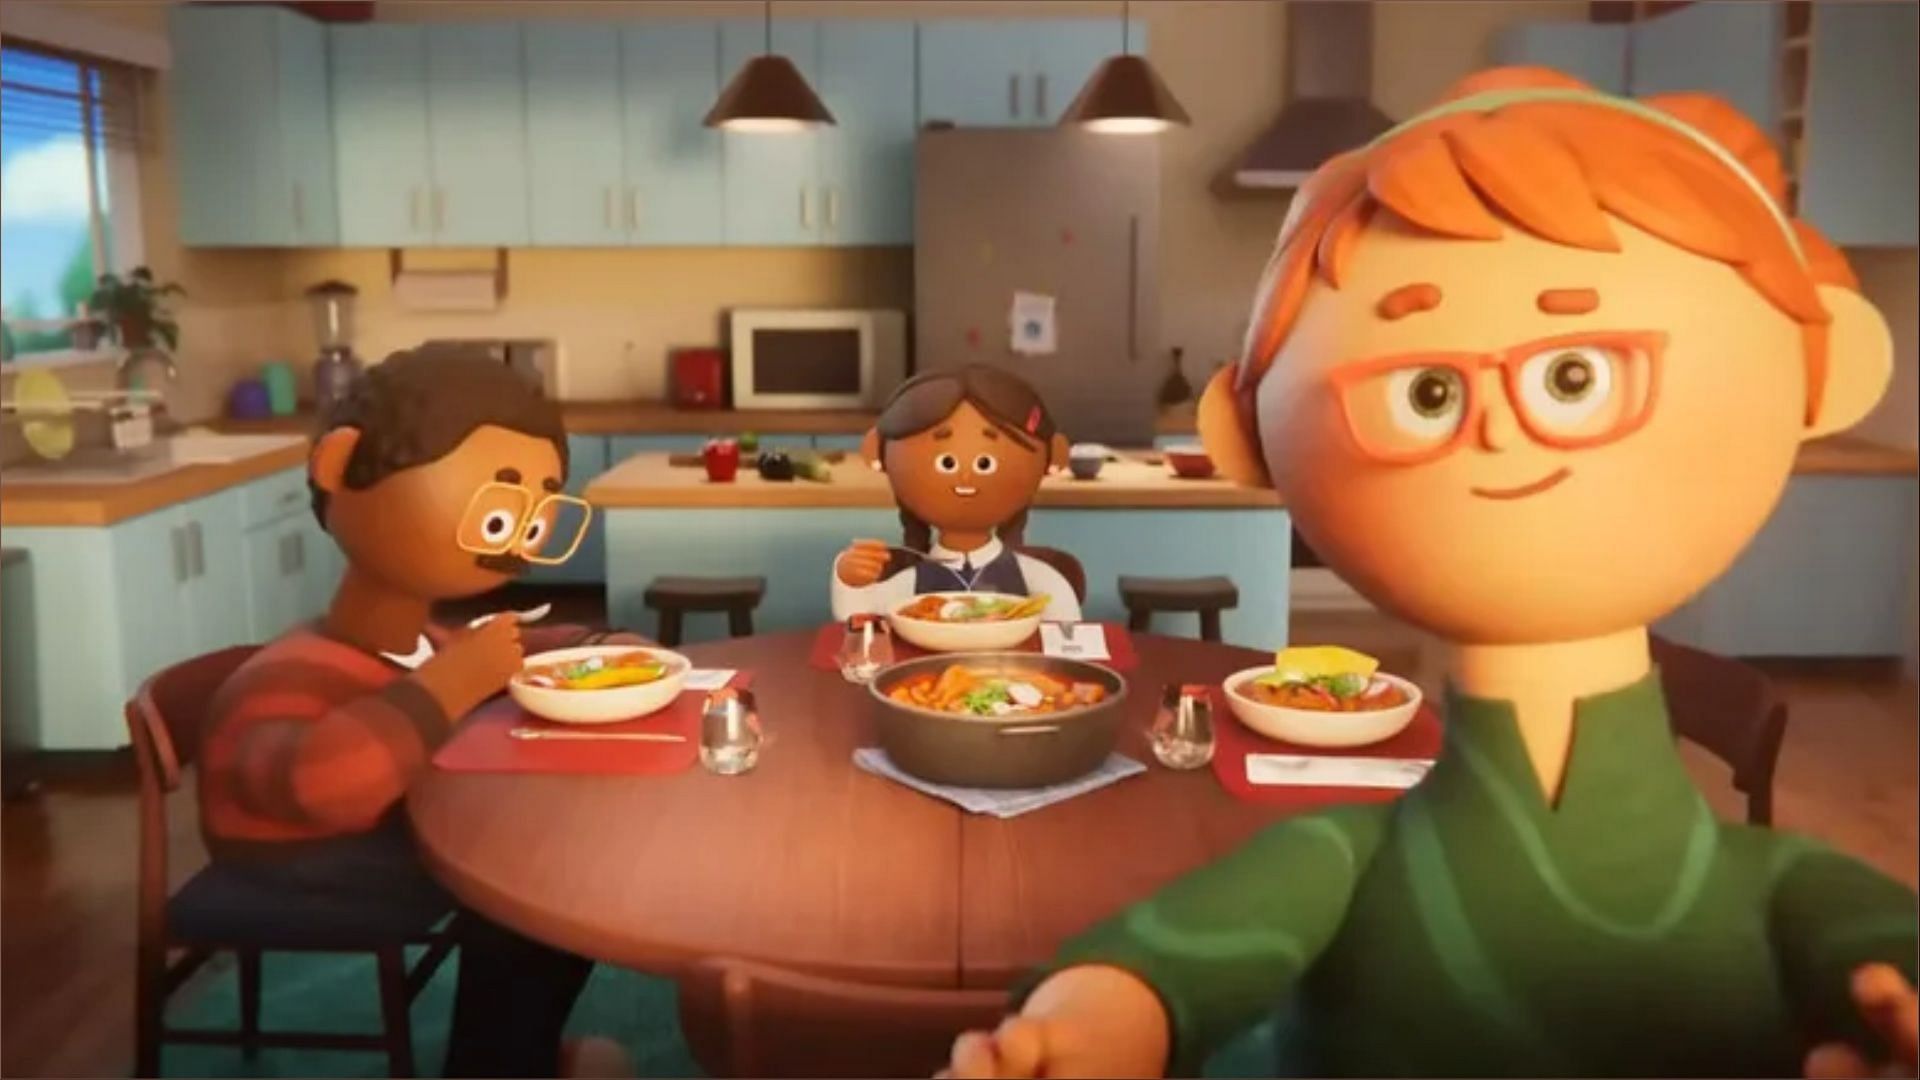 The 74-minute holiday commercial is available on Vimeo and YouTube (Image via Kroger / YouTube)